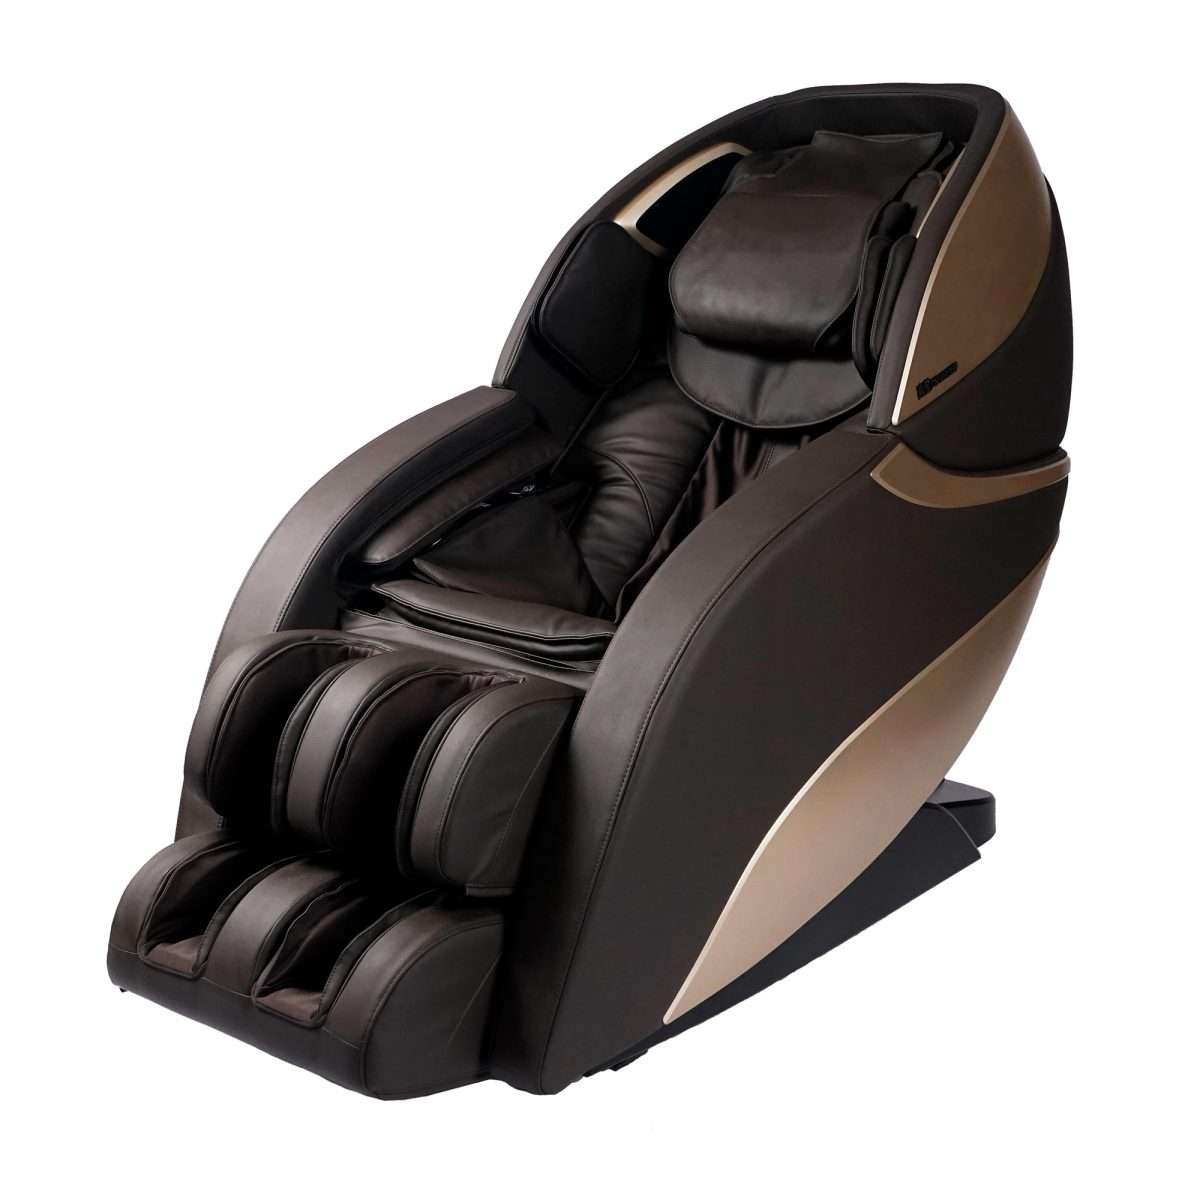 Massage Chair Review â Tips on finding the best massage chair